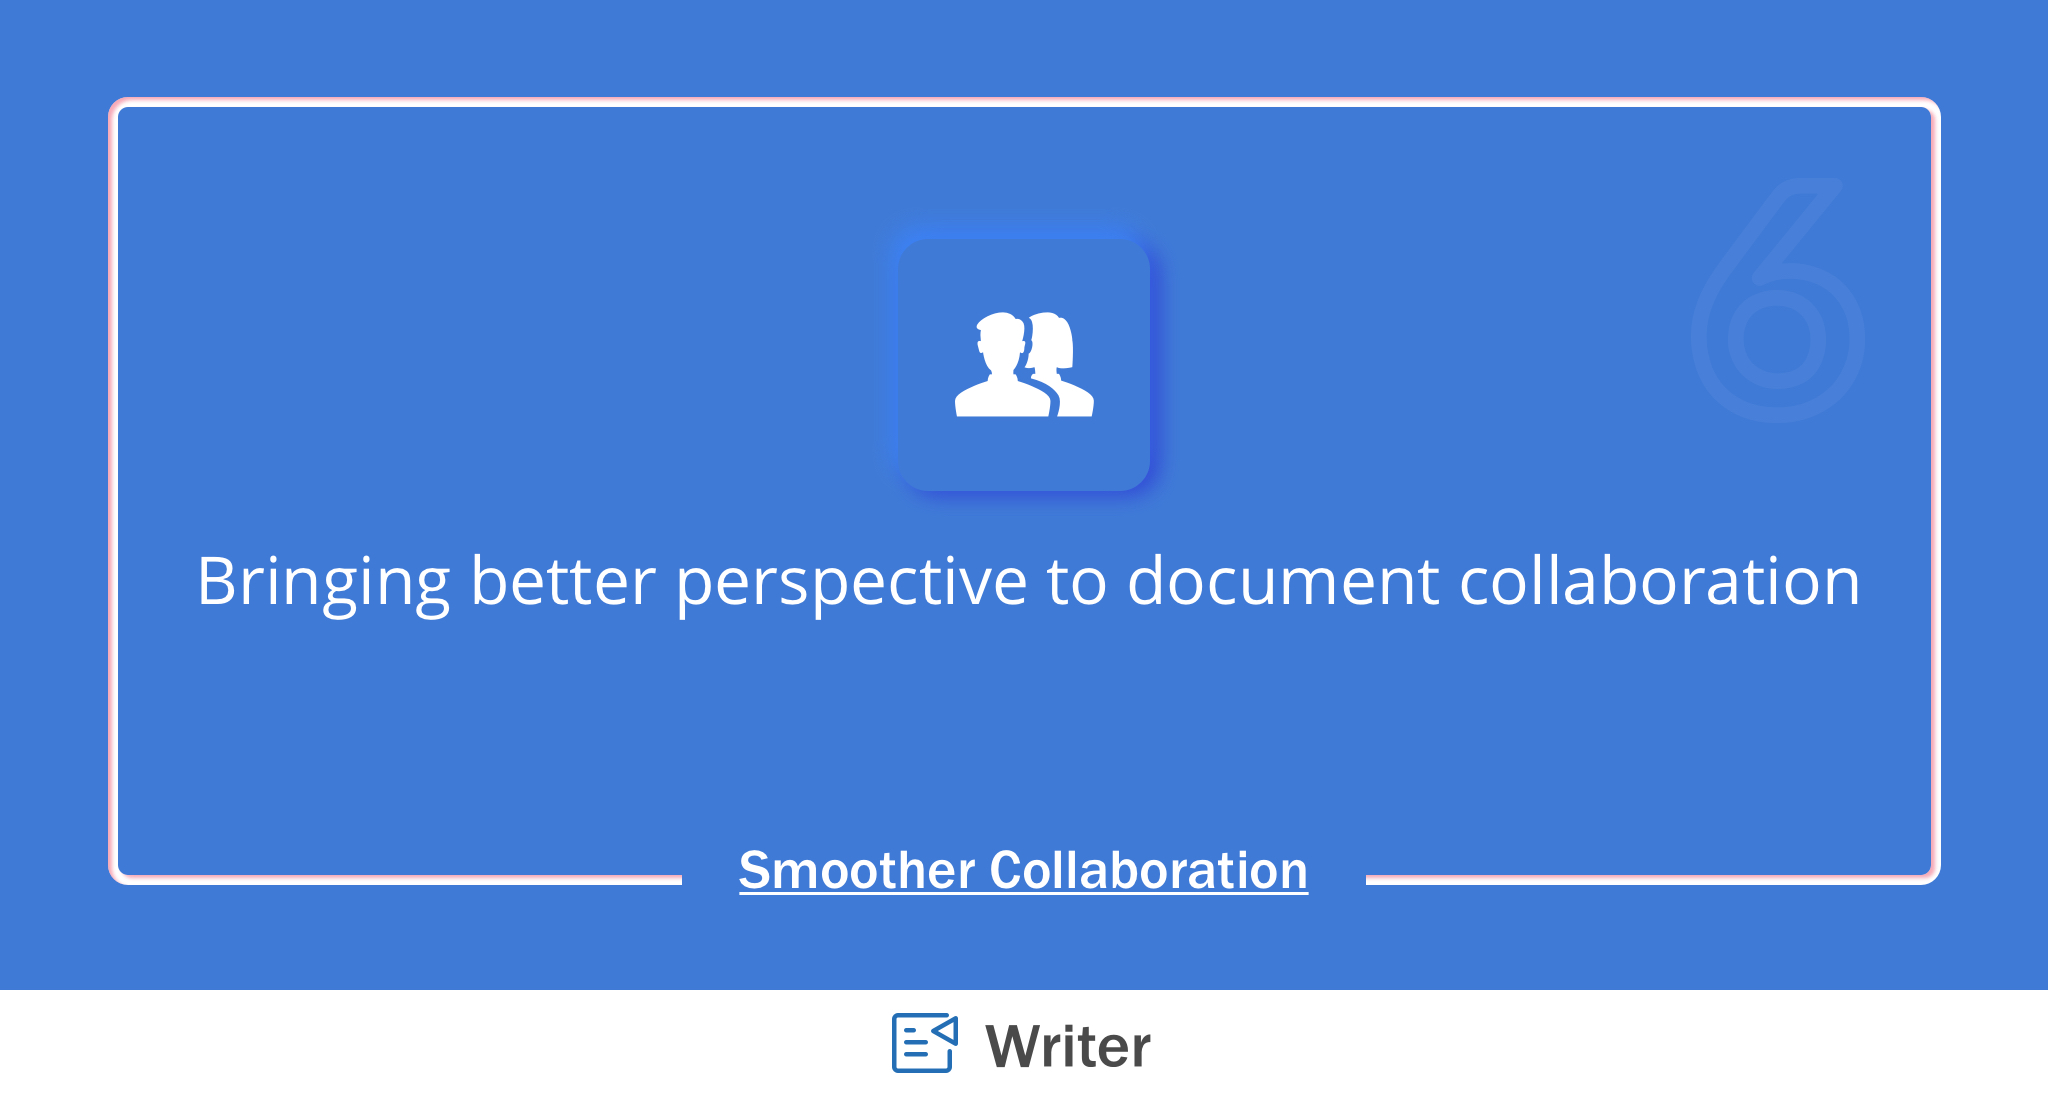 Introducing exceptional document collaboration experiences